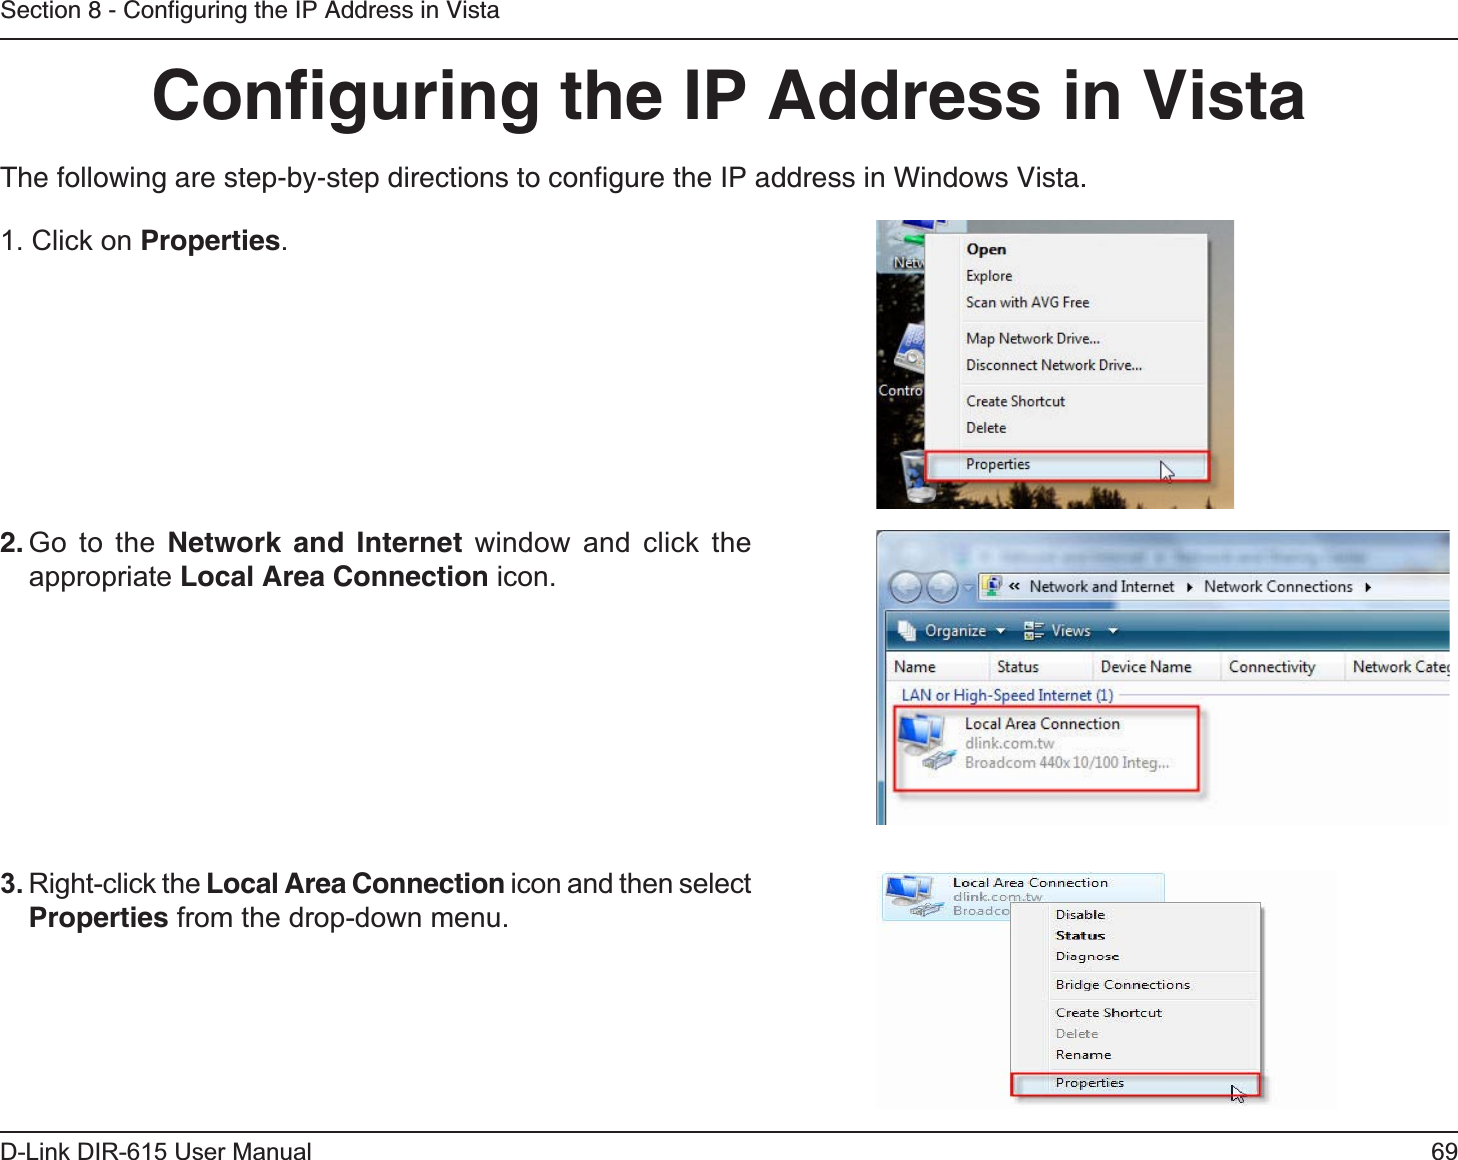 69D-Link DIR-615 User ManualSection 8 - Conﬁguring the IP Address in VistaConﬁguring the IP Address in VistaThe following are step-by-step directions to conﬁgure the IP address in Windows Vista.2. Go to the Network and Internet window and click the appropriate Local Area Connection icon. 1. Click on Properties.     3. Right-click the Local Area Connection icon and then select Properties from the drop-down menu. 